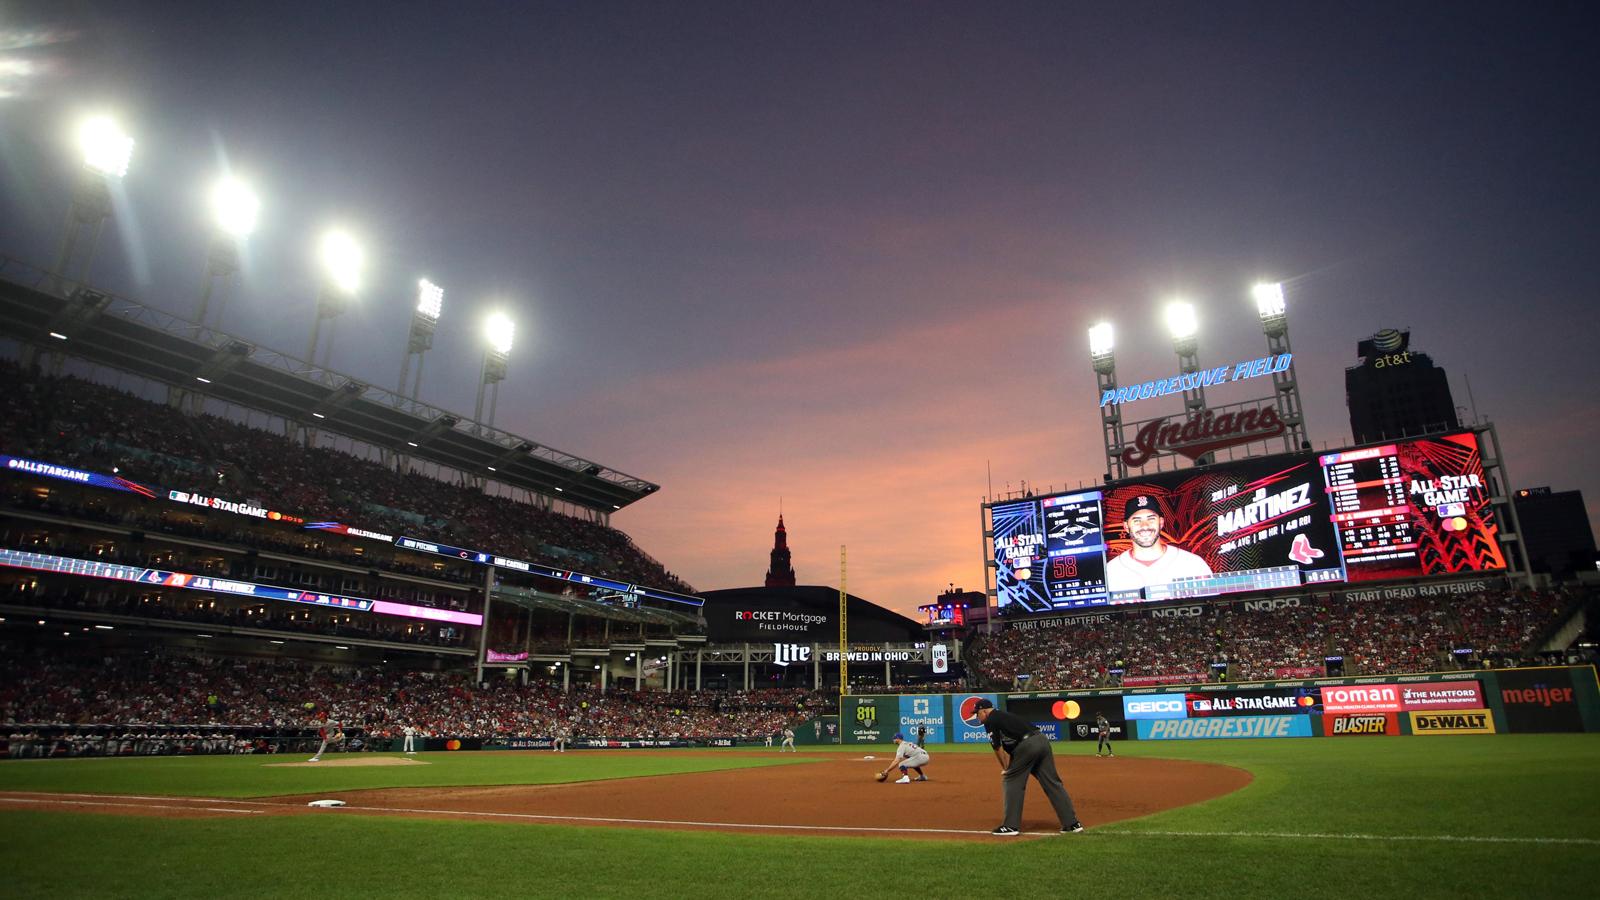 Cleveland Indians 2020 schedule: Opening Day March 26 vs. Tigers, more